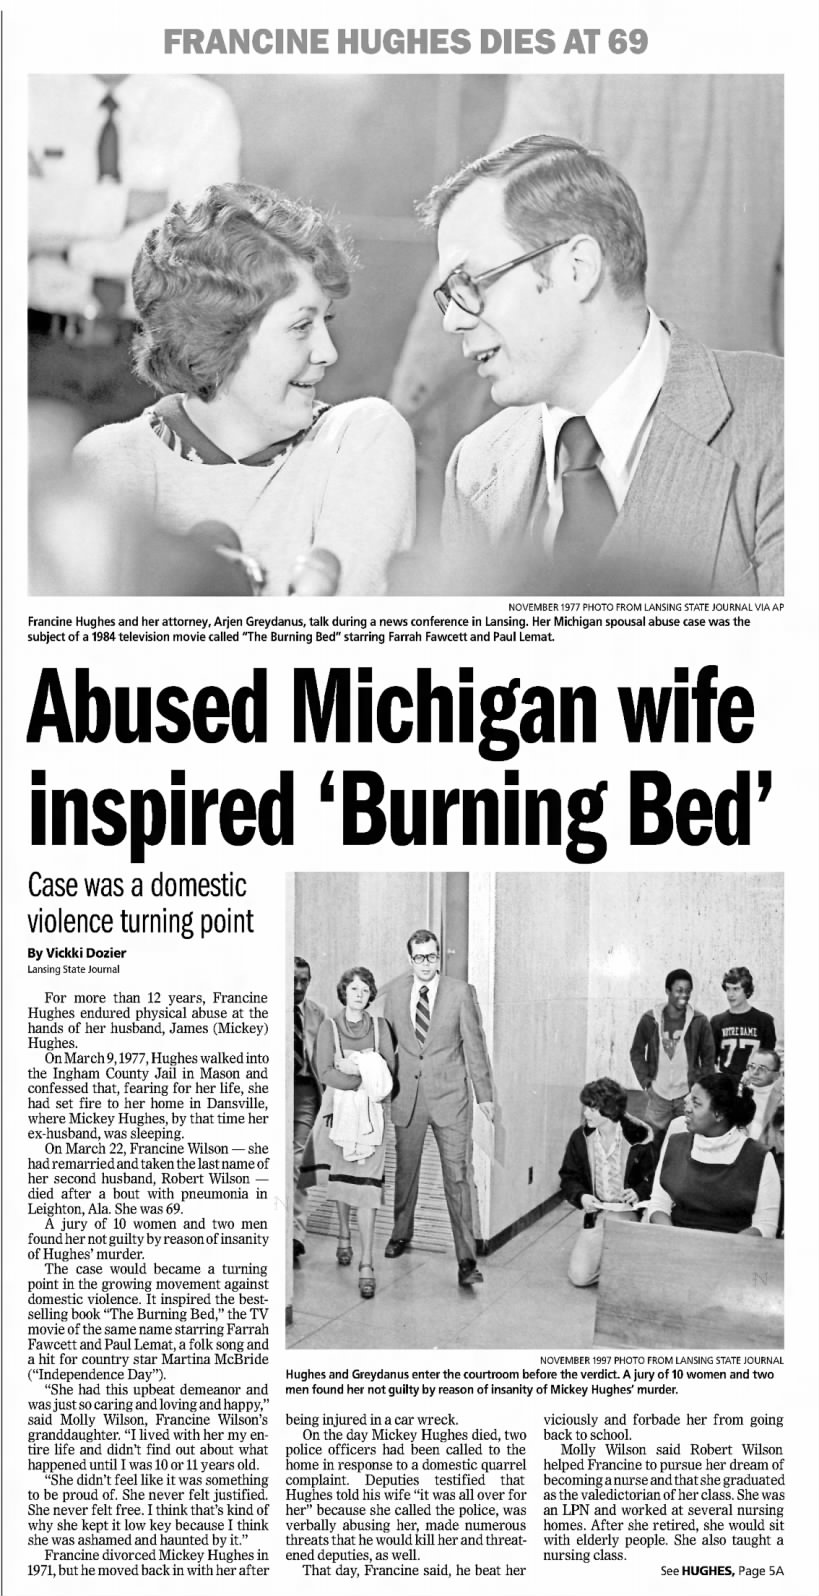 Abused Michigan wife inspired 'Burning Bed'